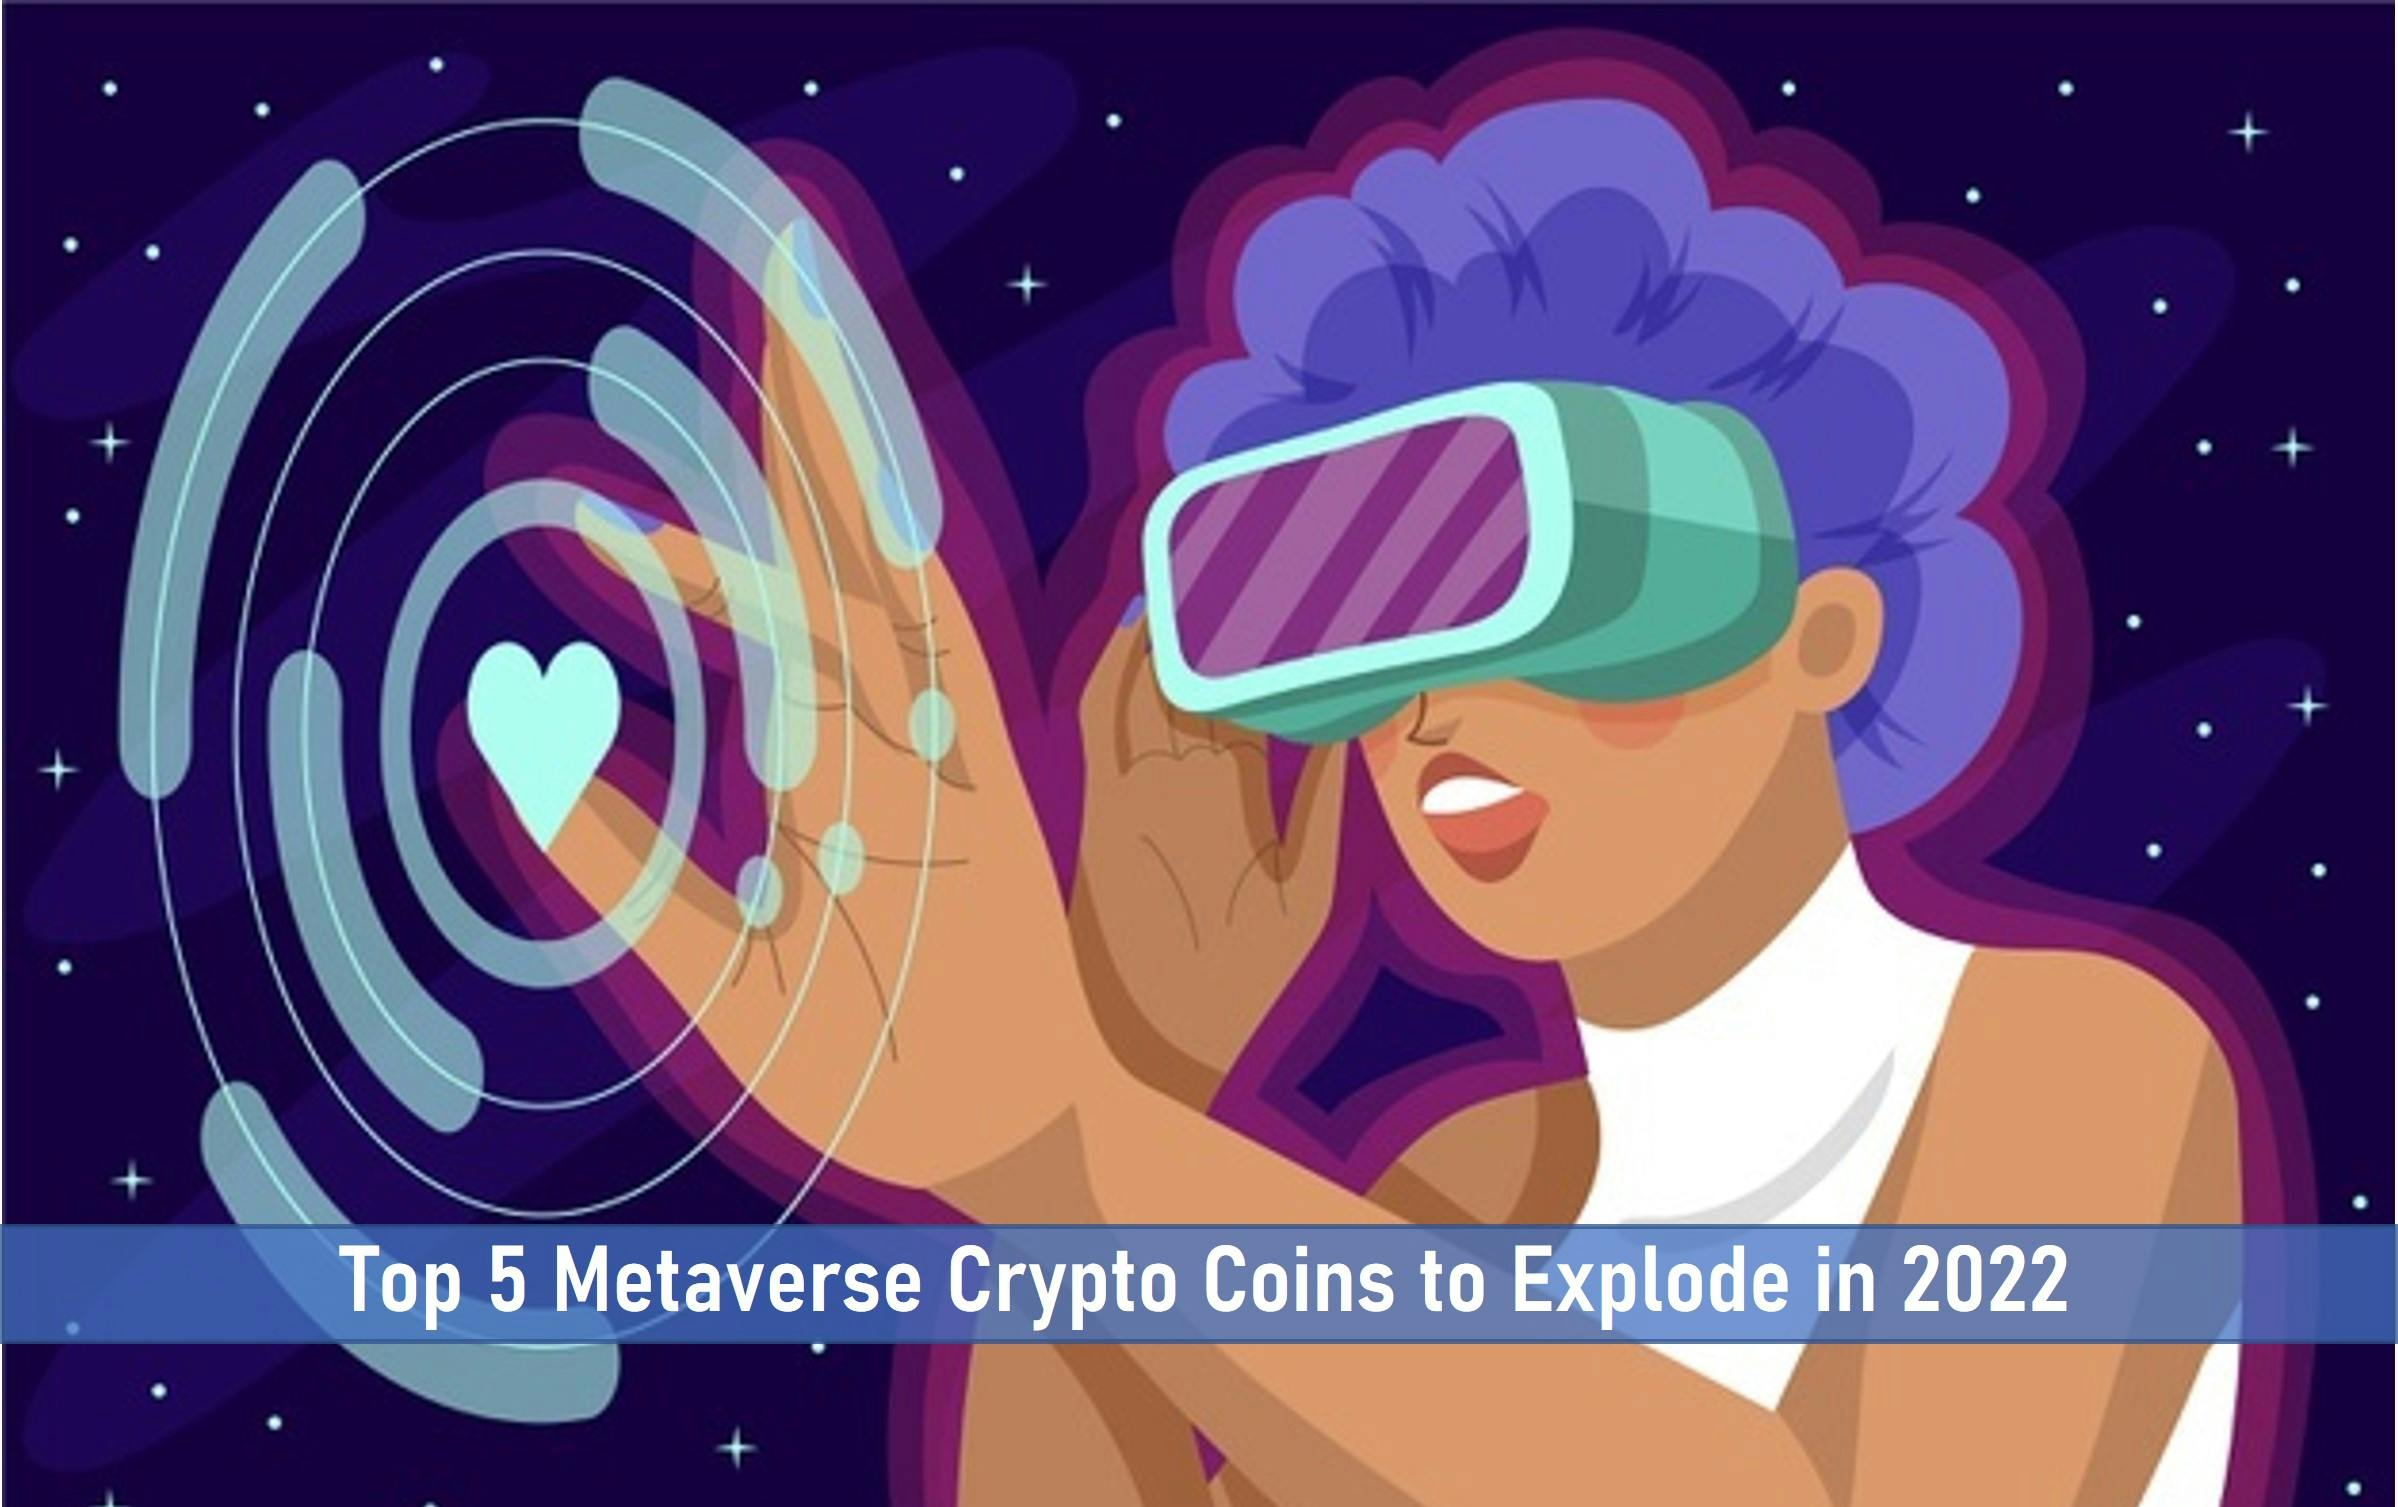 Top 5 Metaverse Crypto Coins to Explode in 2023